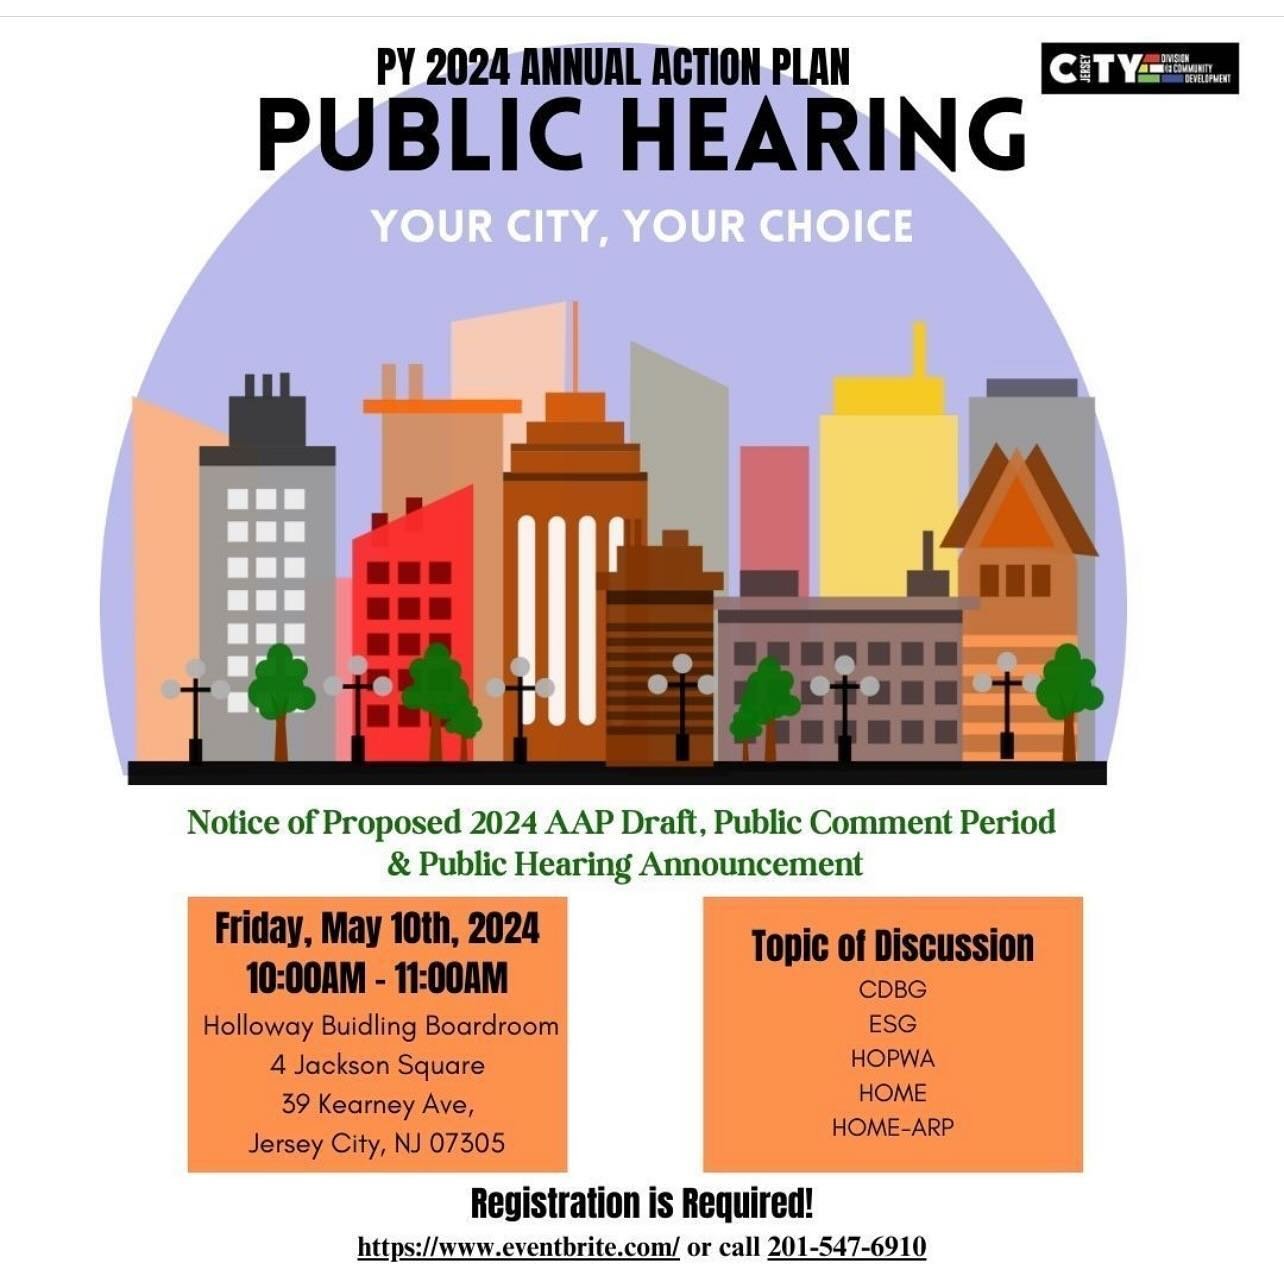 PY 2024 Annual Action Plan Public Hearing
 
Friday, May 10, 2024 from 10:00 AM to 11:00 AM (ET)
4 Jackson Square, Holloway Building Boardroom &bull; Jersey City NJ